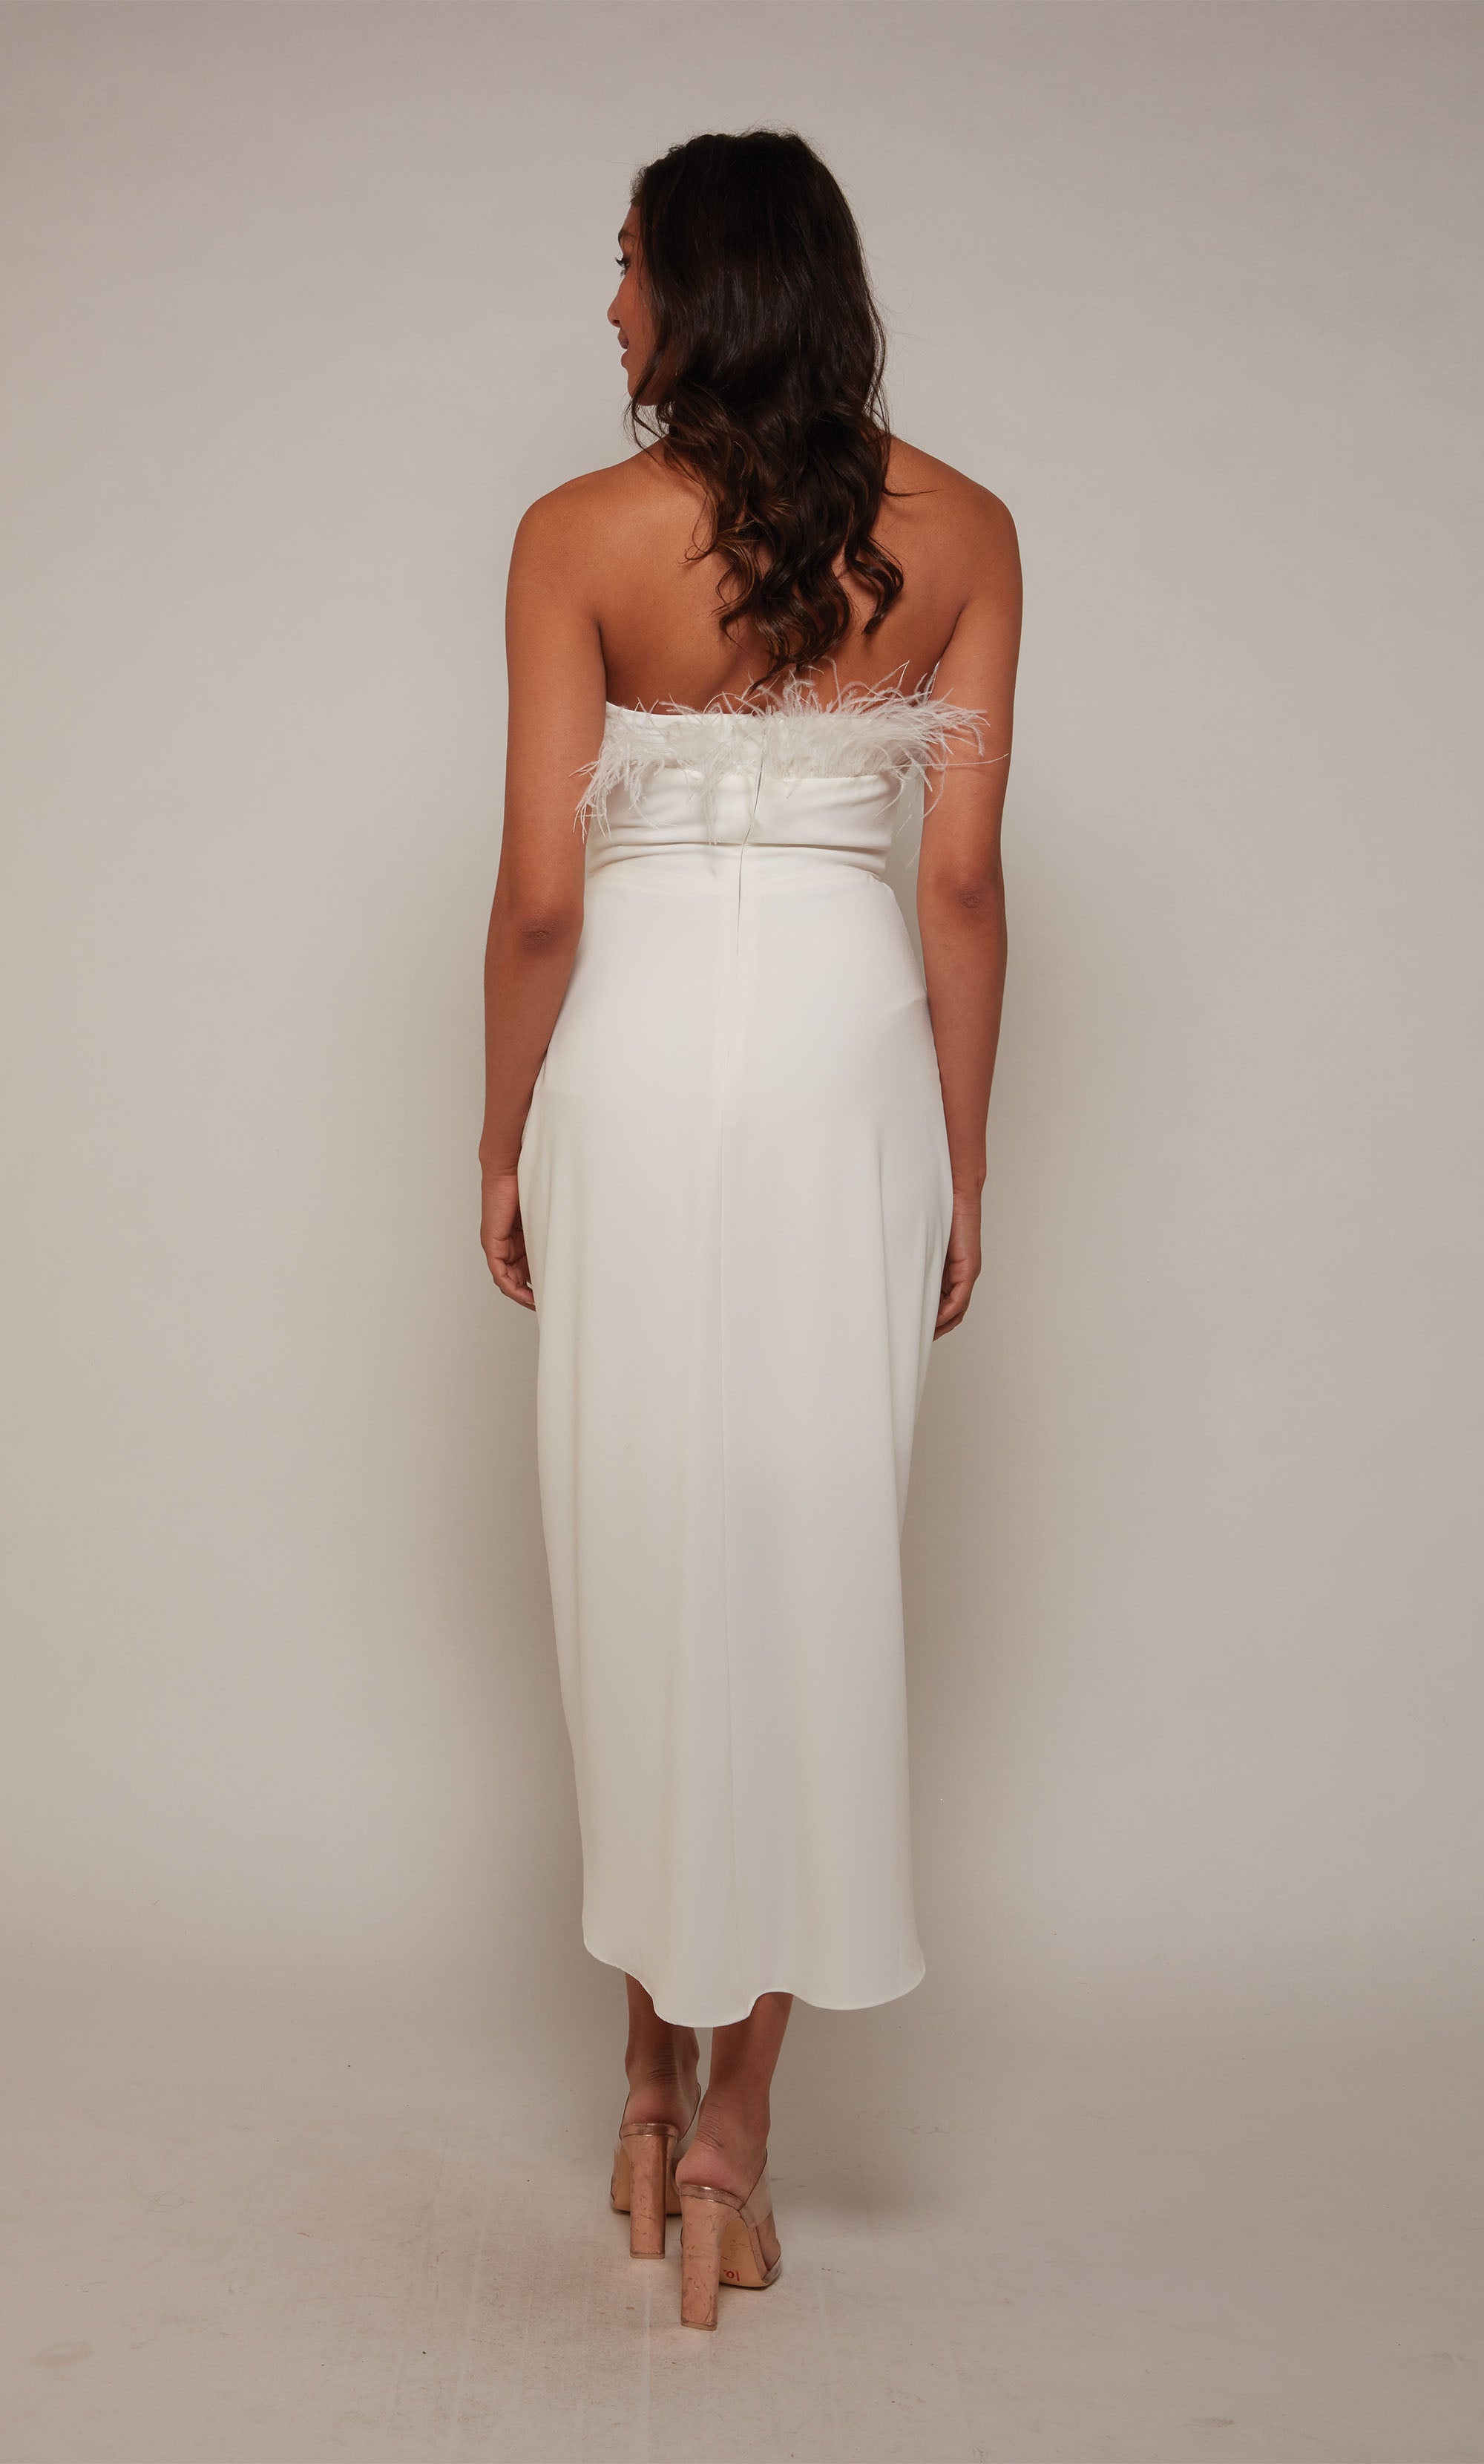 An ivory colored asymmetrical hemline dress  with a strapless neckline, feather trim, and a cascading drape in the front.